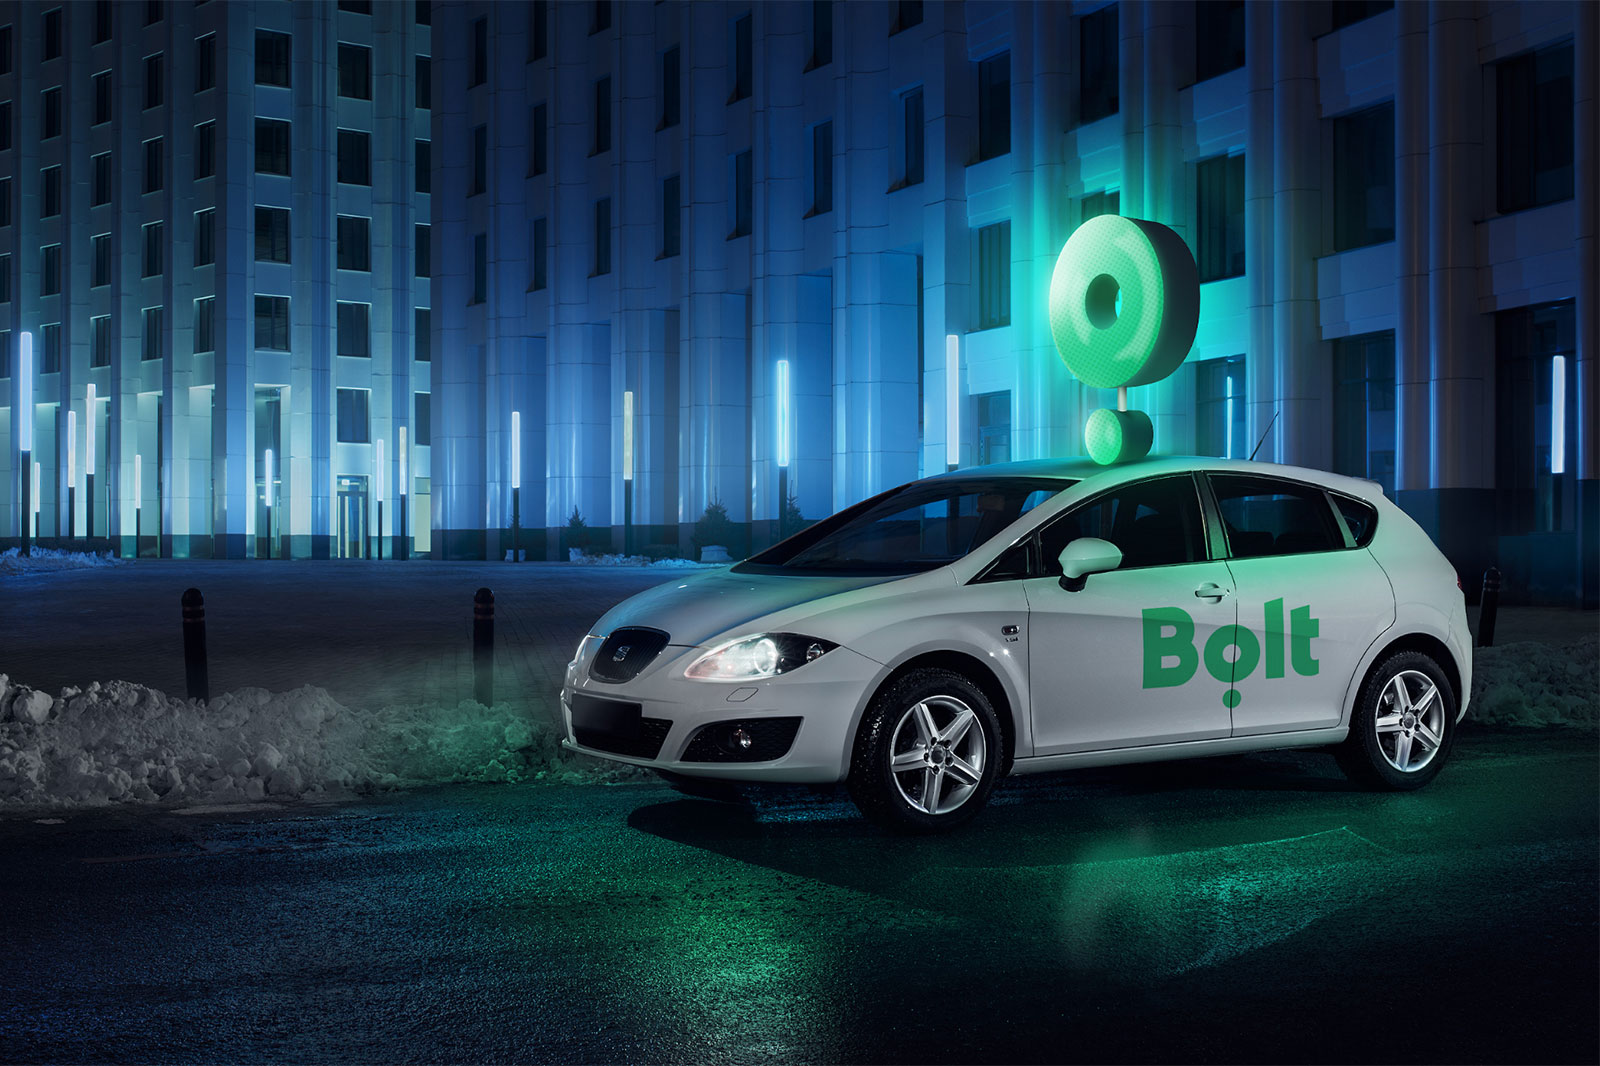 Bolt CEO Markus Villig: 'In 20 Years, Most Cities will Ban Private